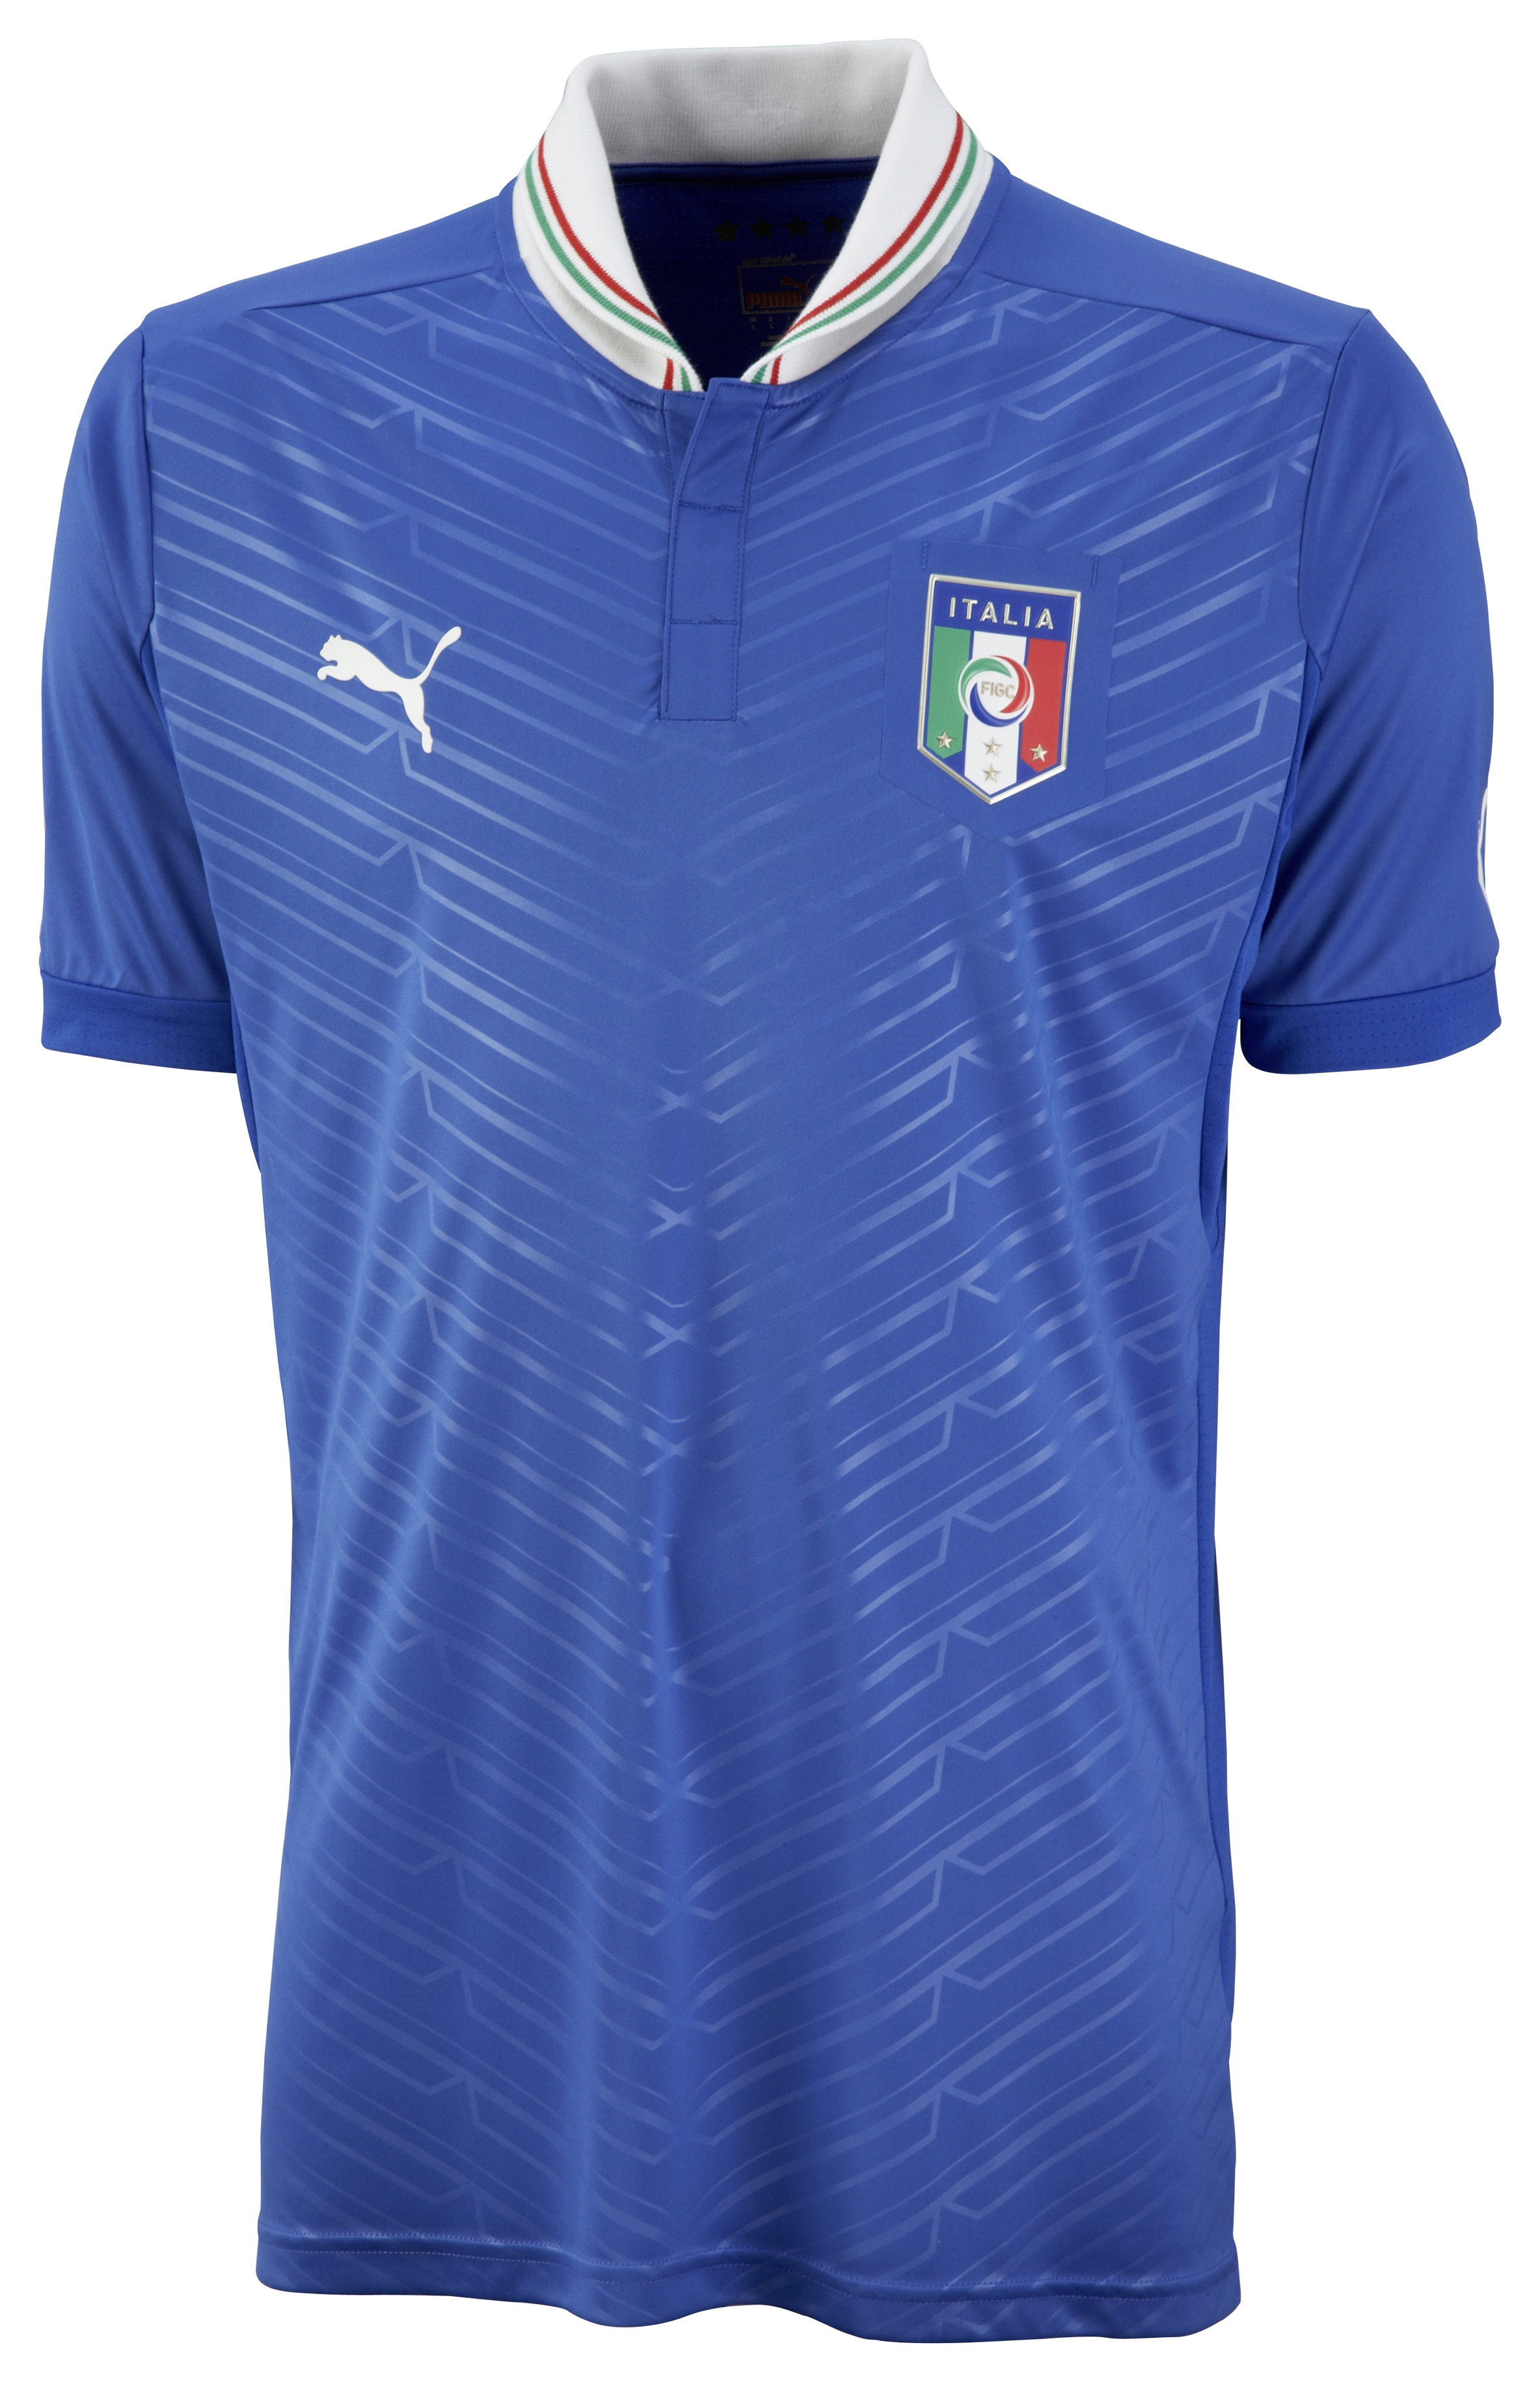 Football kit release: kit PUMA Italy – 2012 home Euro new launch for SportLocker